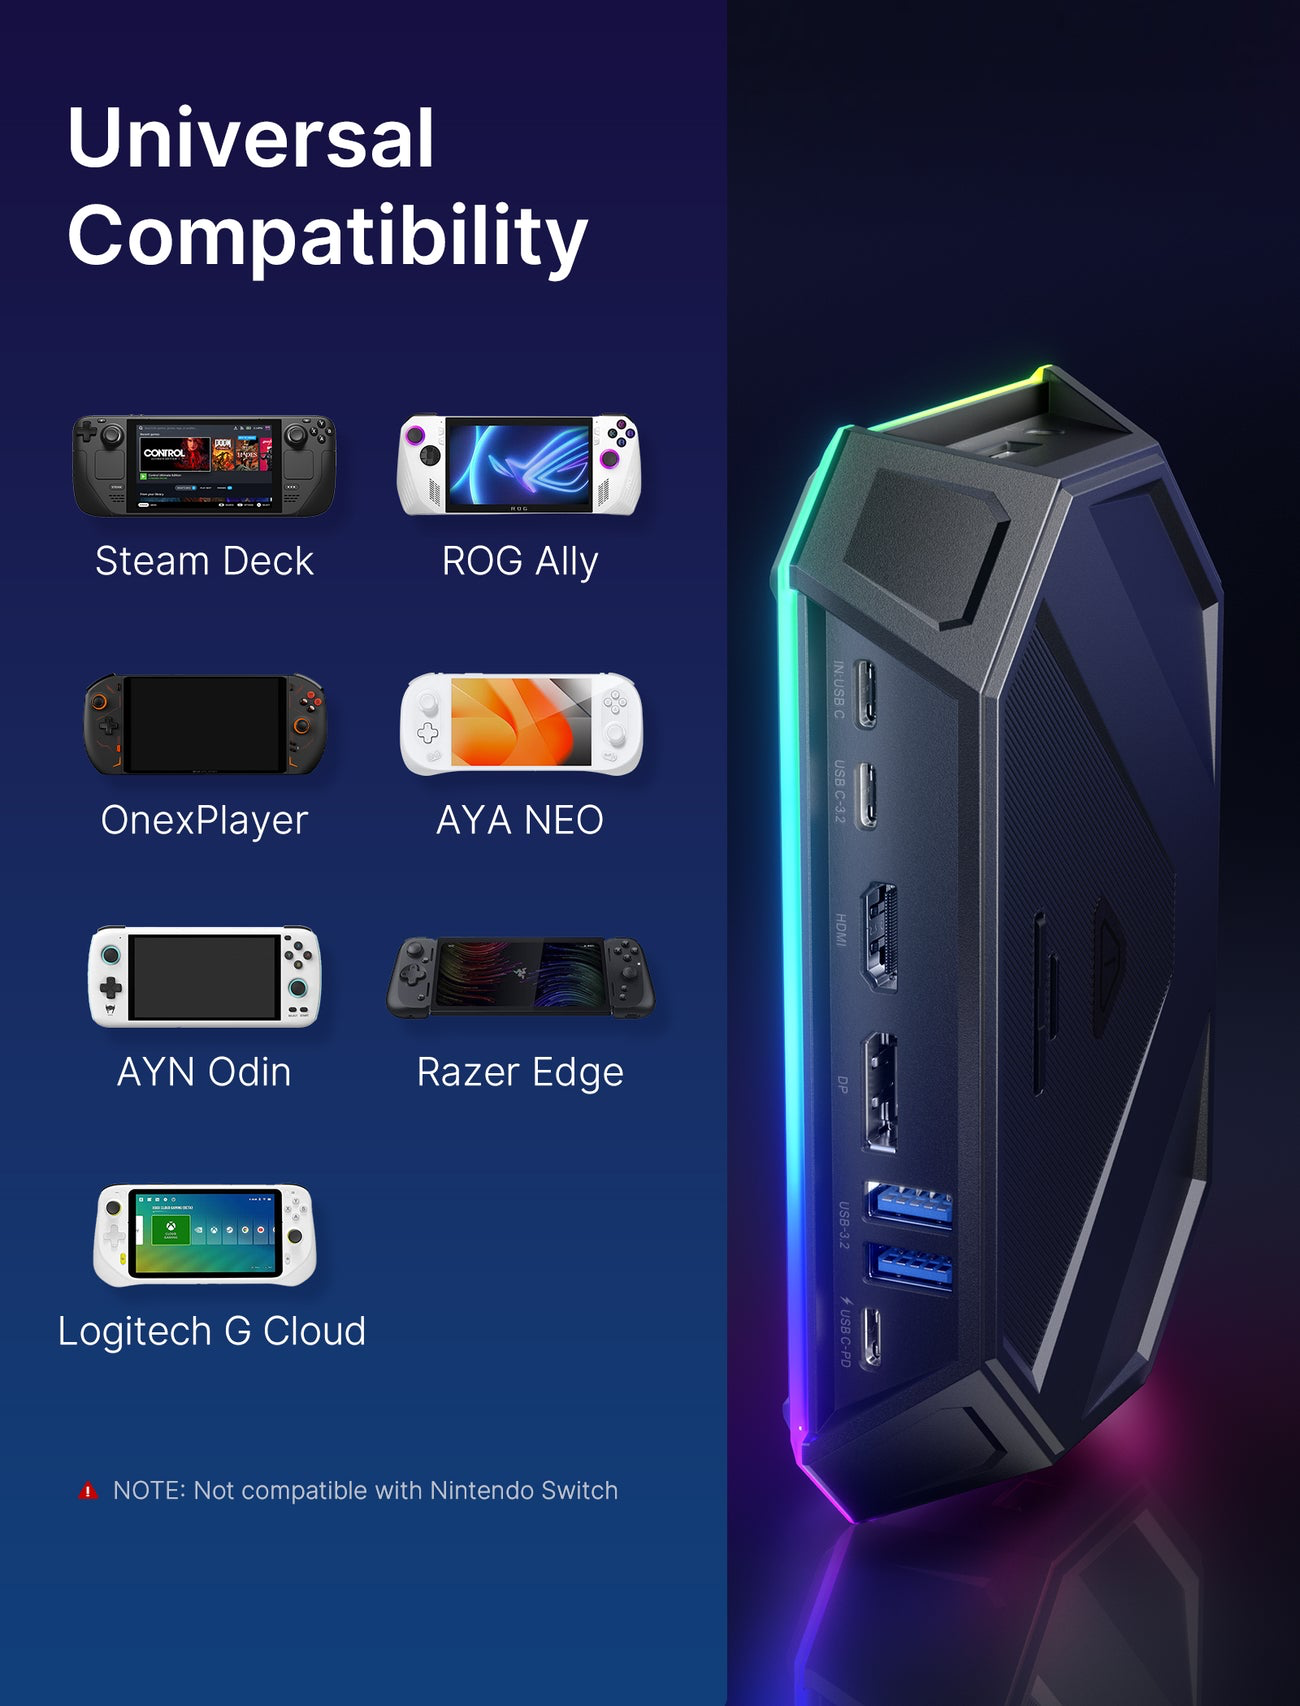 WHICH IS THE BEST ROG ALLY DOCKING STATION? 